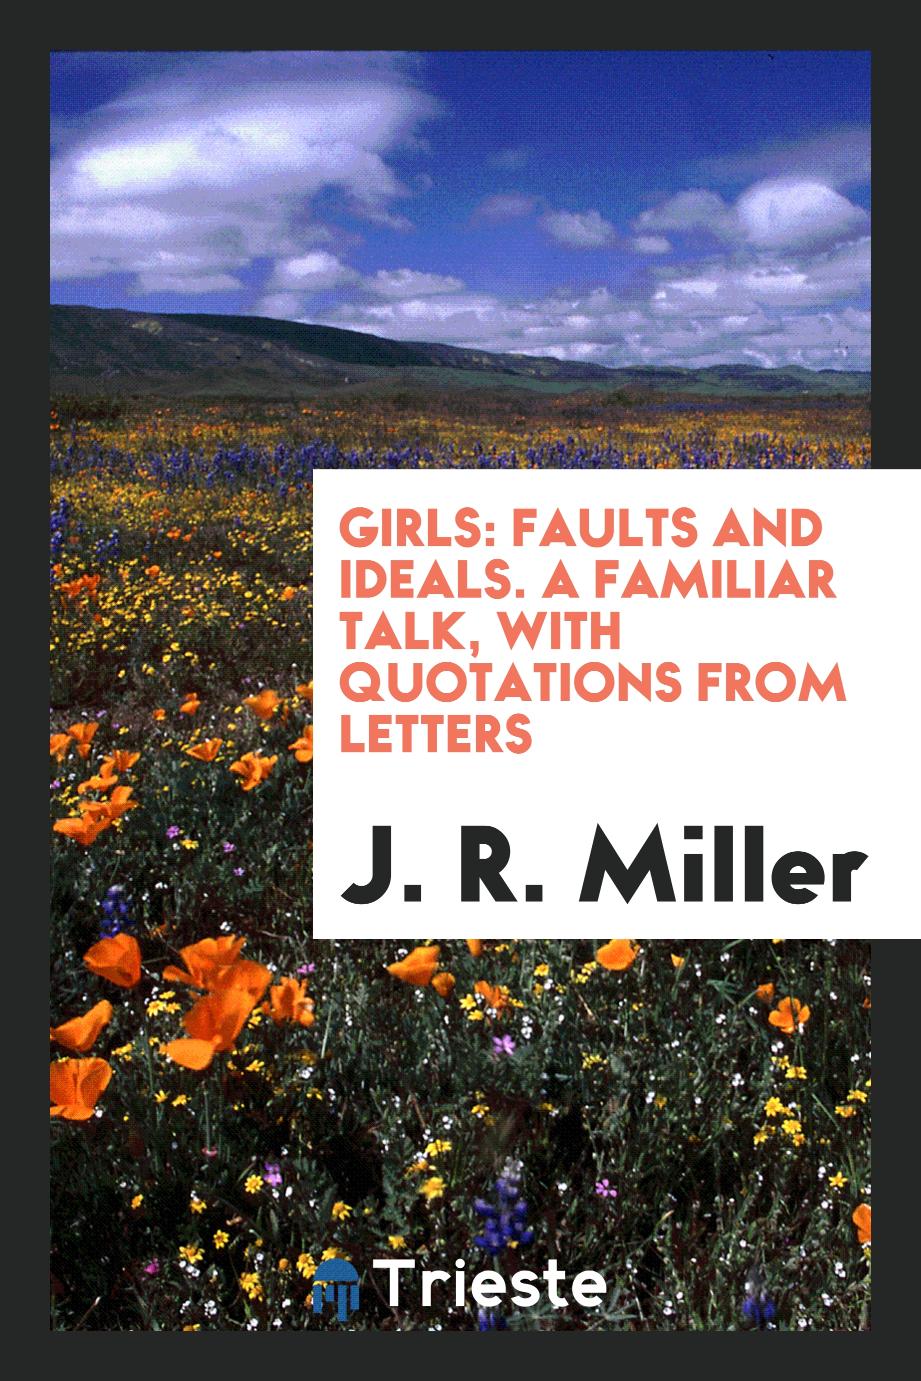 Girls: faults and ideals. A familiar talk, with quotations from letters